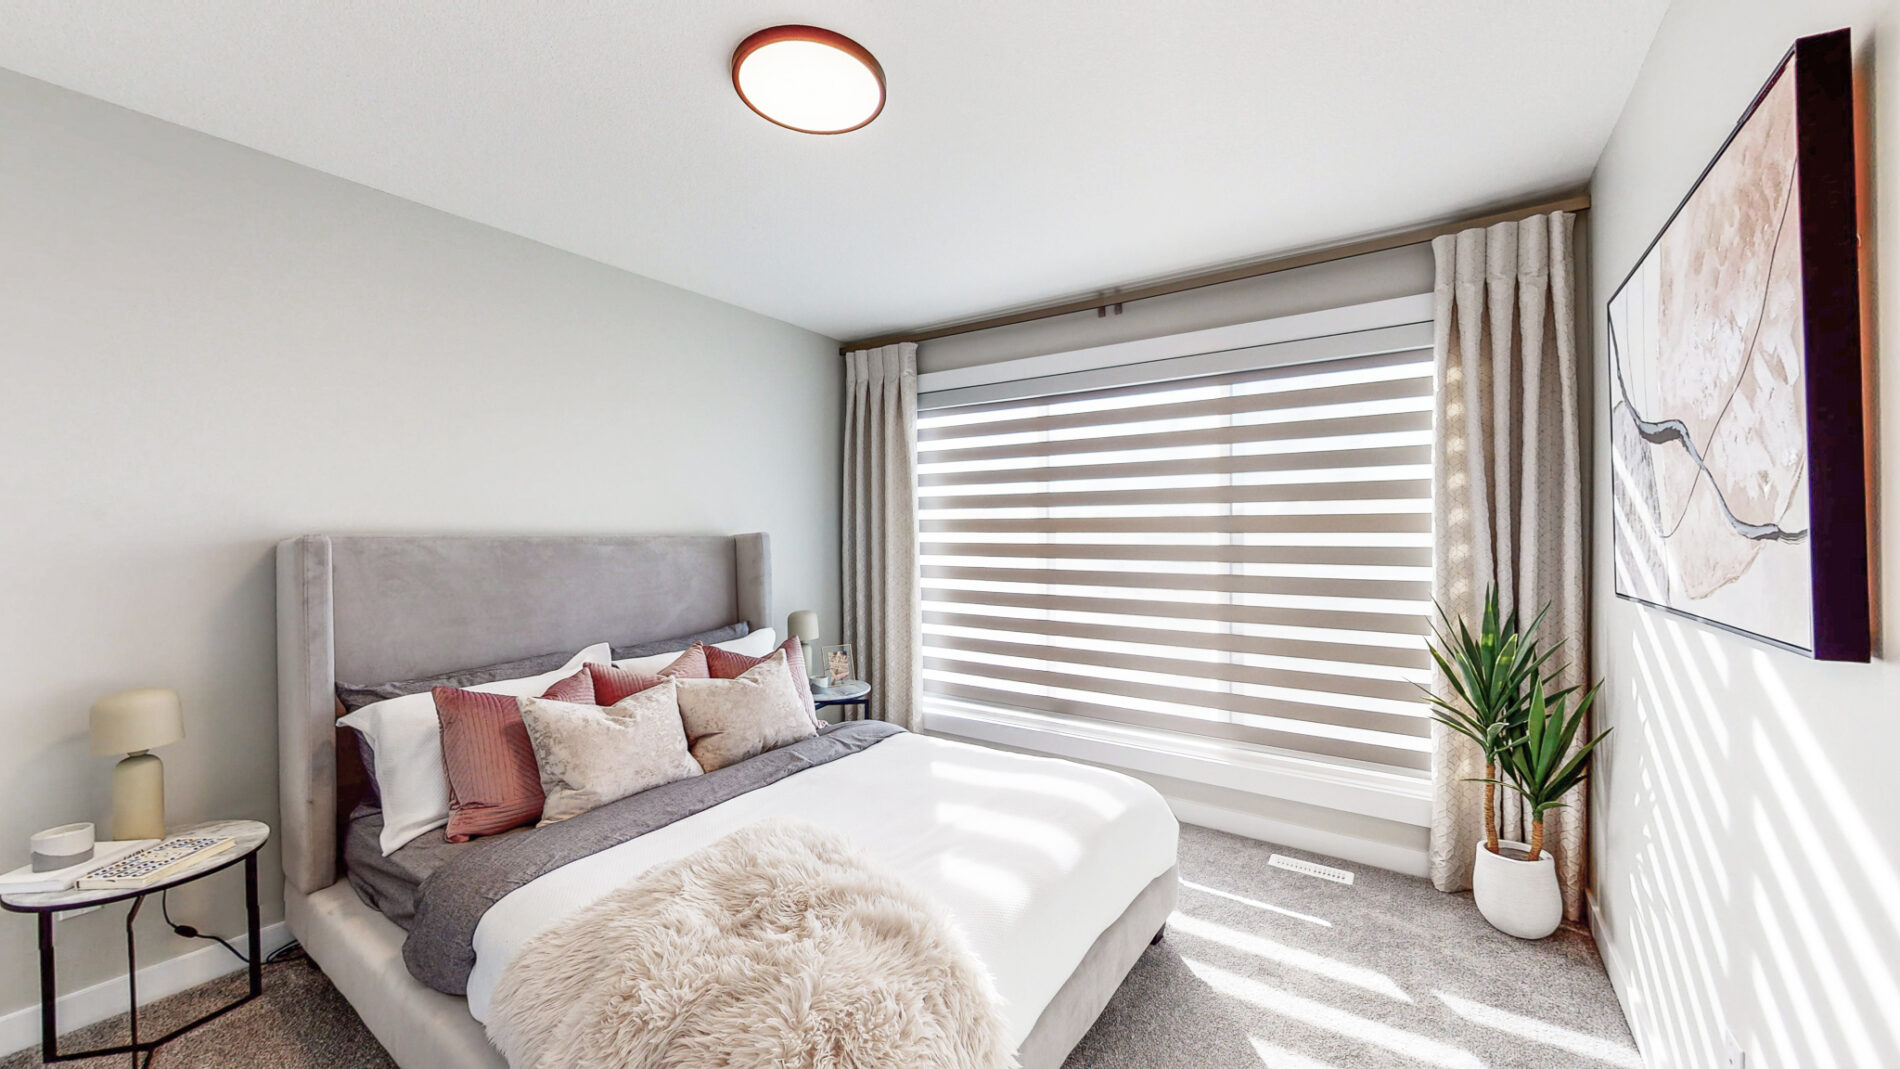 Natural light is diffused through zebra blinds covering the oversized window in a secondary bedroom